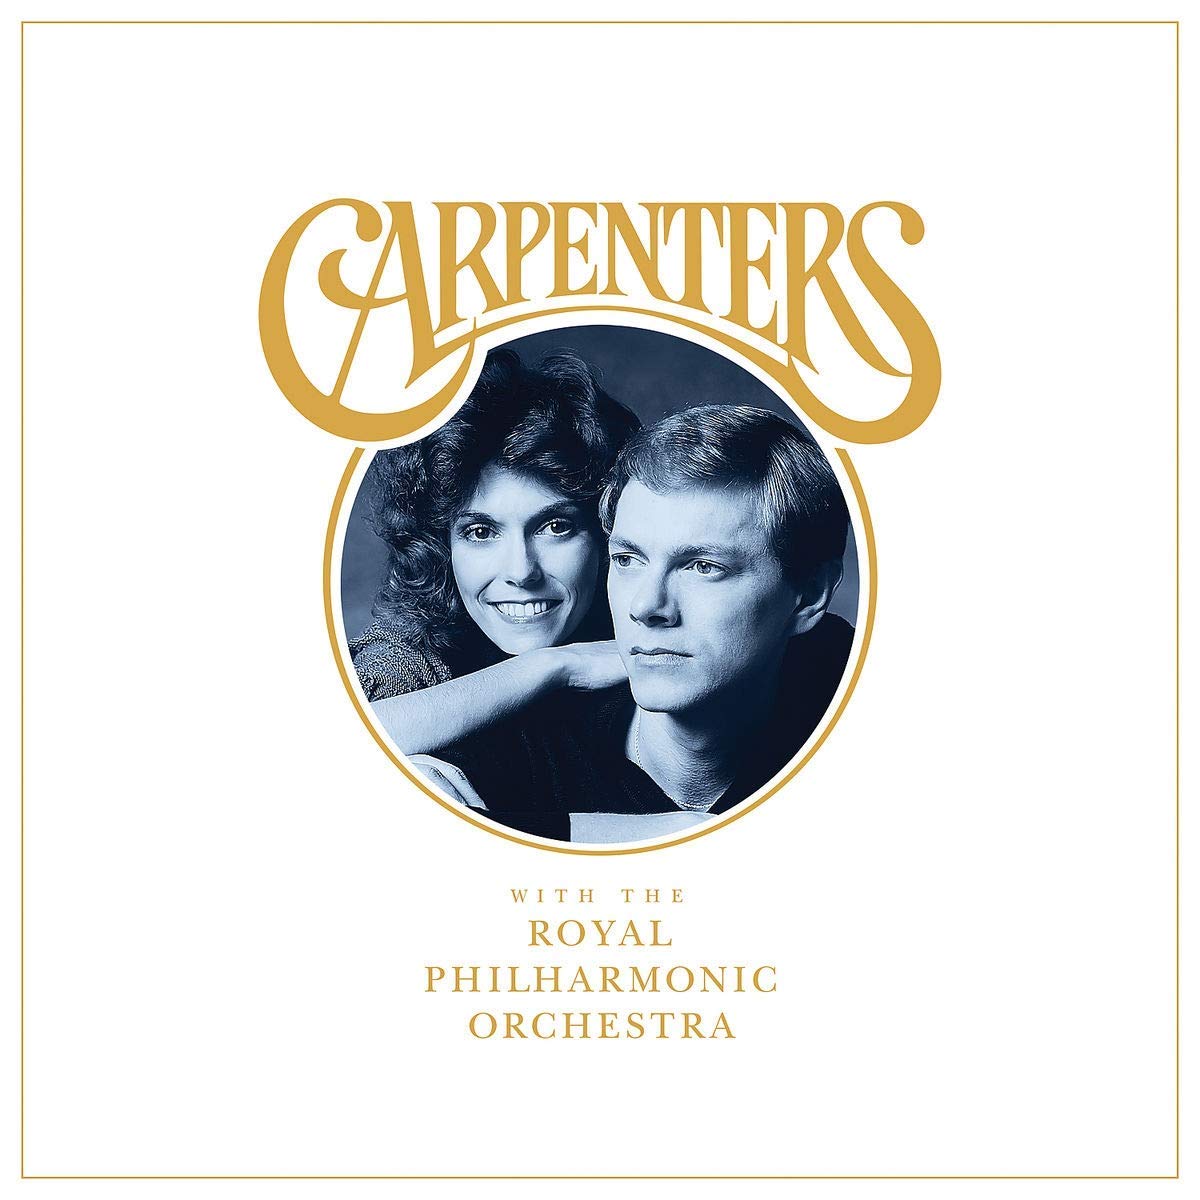 CD Shop - CARPENTERS CARPENTERS WITH THE ROYAL